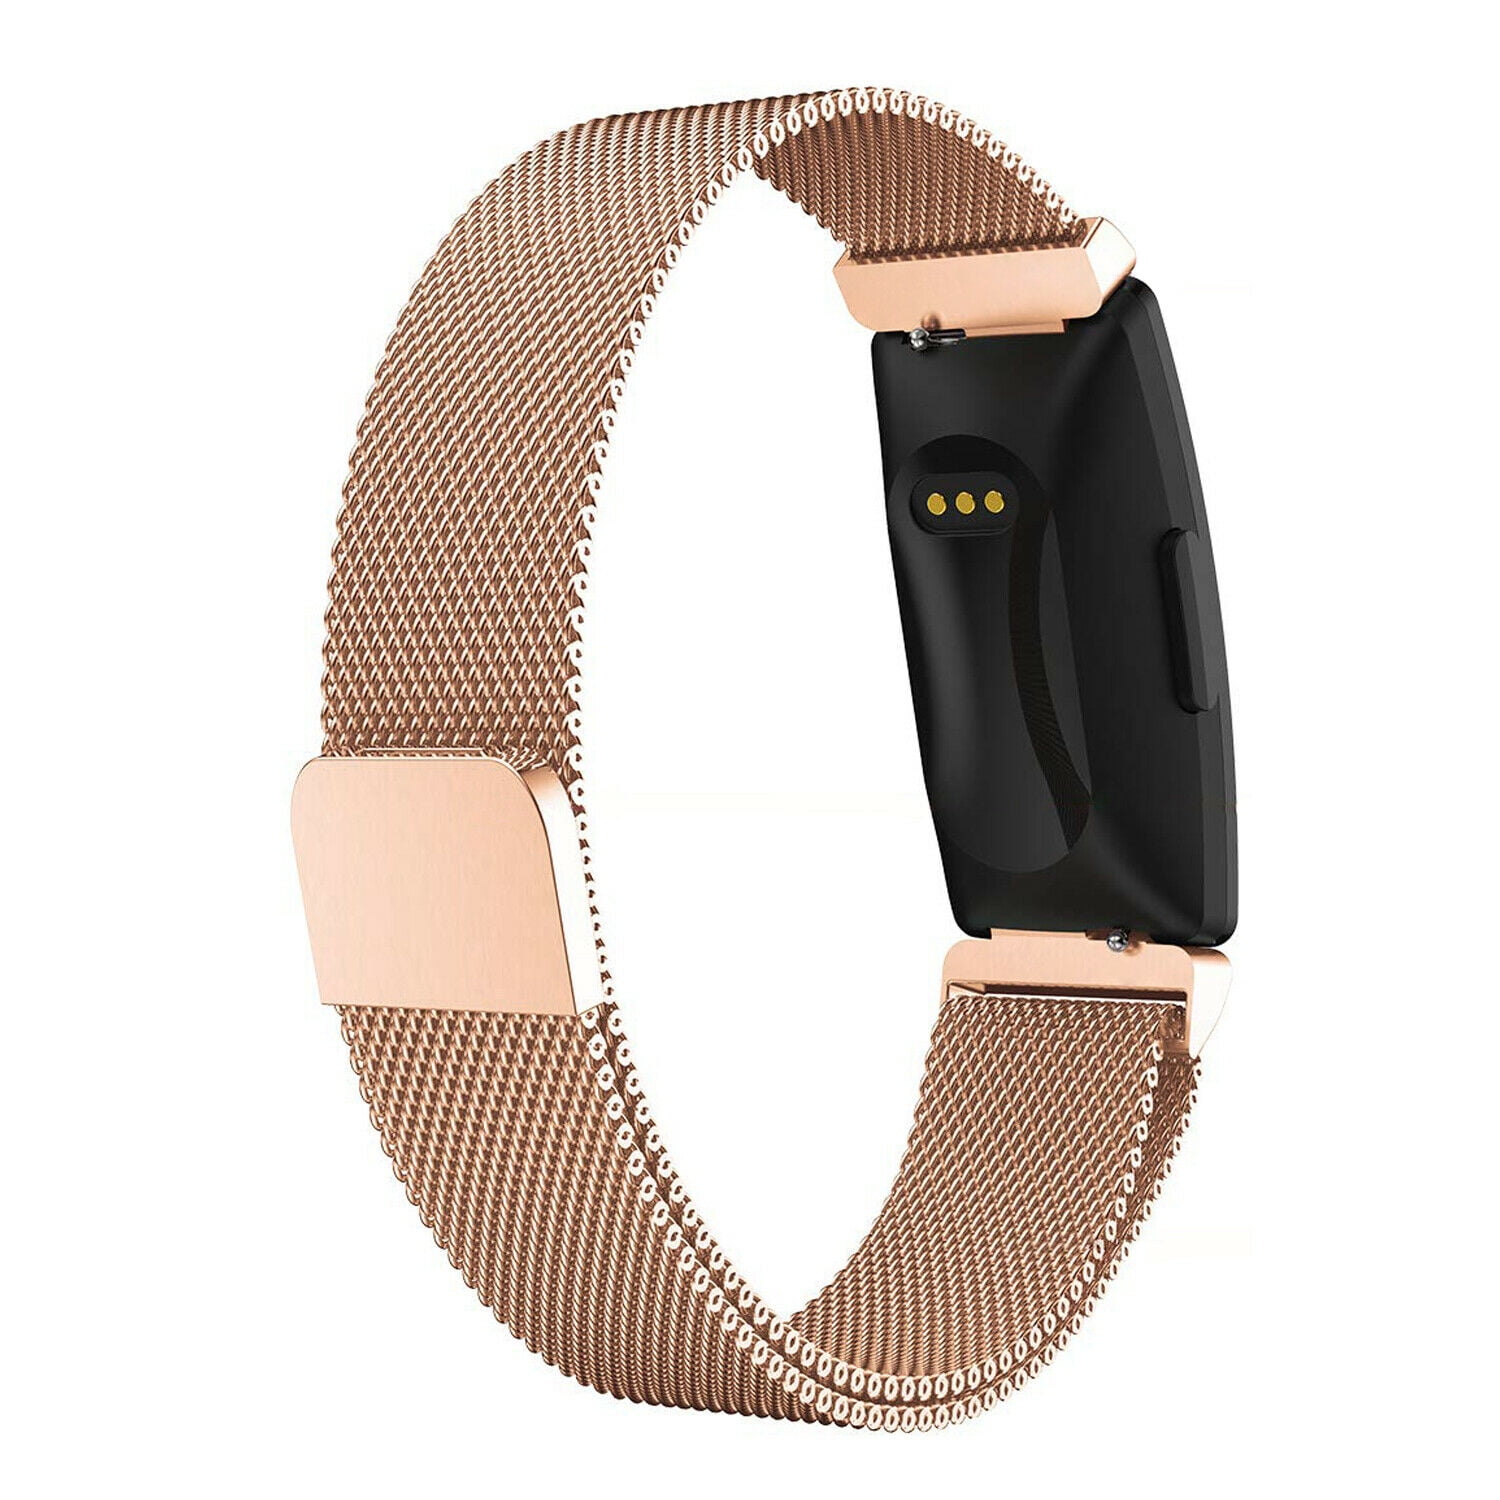 GoldCherry Bands For Fitbit Inspire HR Bands/Fitbit Inspire 2 Band,Metal  Stainless Steel Magnetic Men/Women Replacement Bands for Fitbit Inspire 